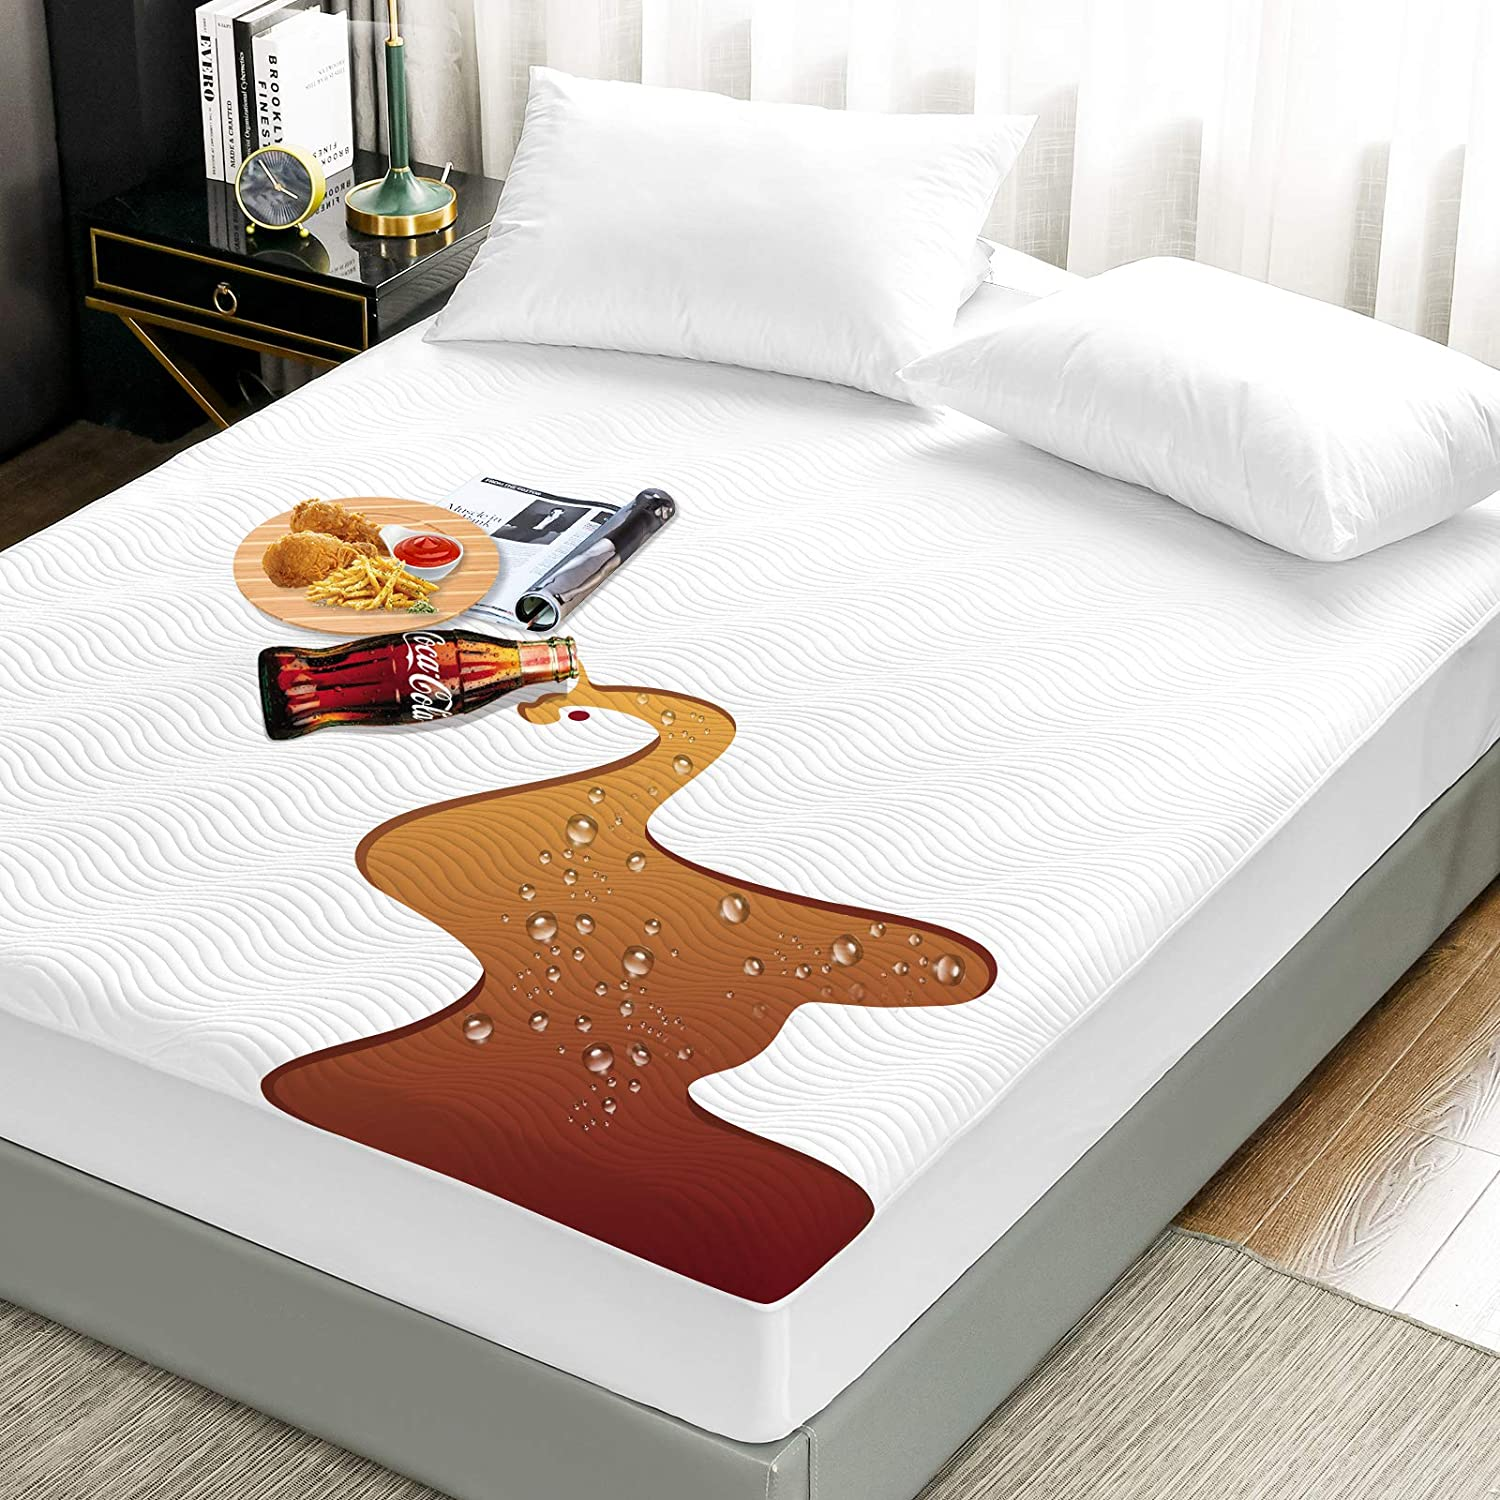 High Quality TPU Waterproof Fitted Stain Release Air Layer Fabric Mattress Protector 